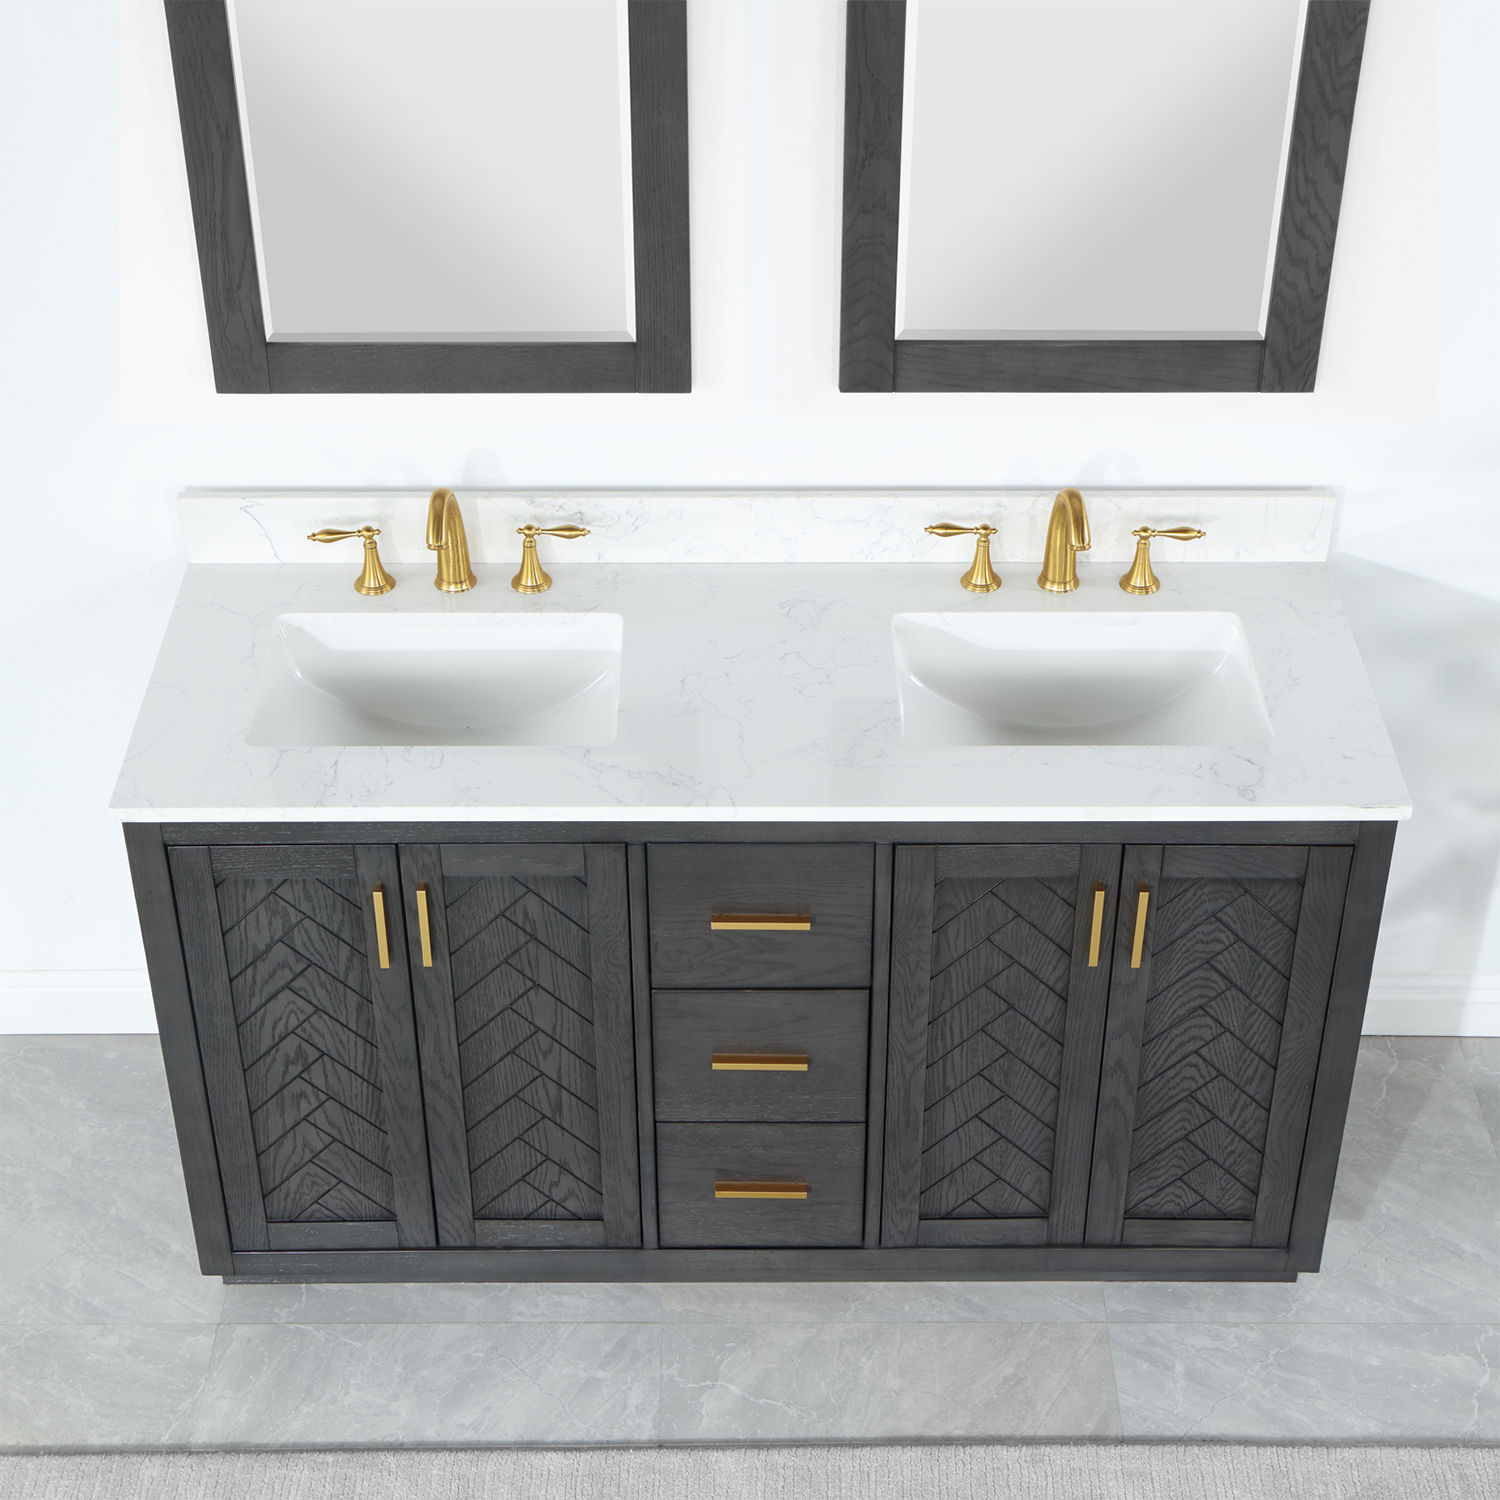  Issac Edwards Collection 60" Double Bathroom Vanity Set in Brown Oak with Grain White Composite Stone Countertop without Mirror